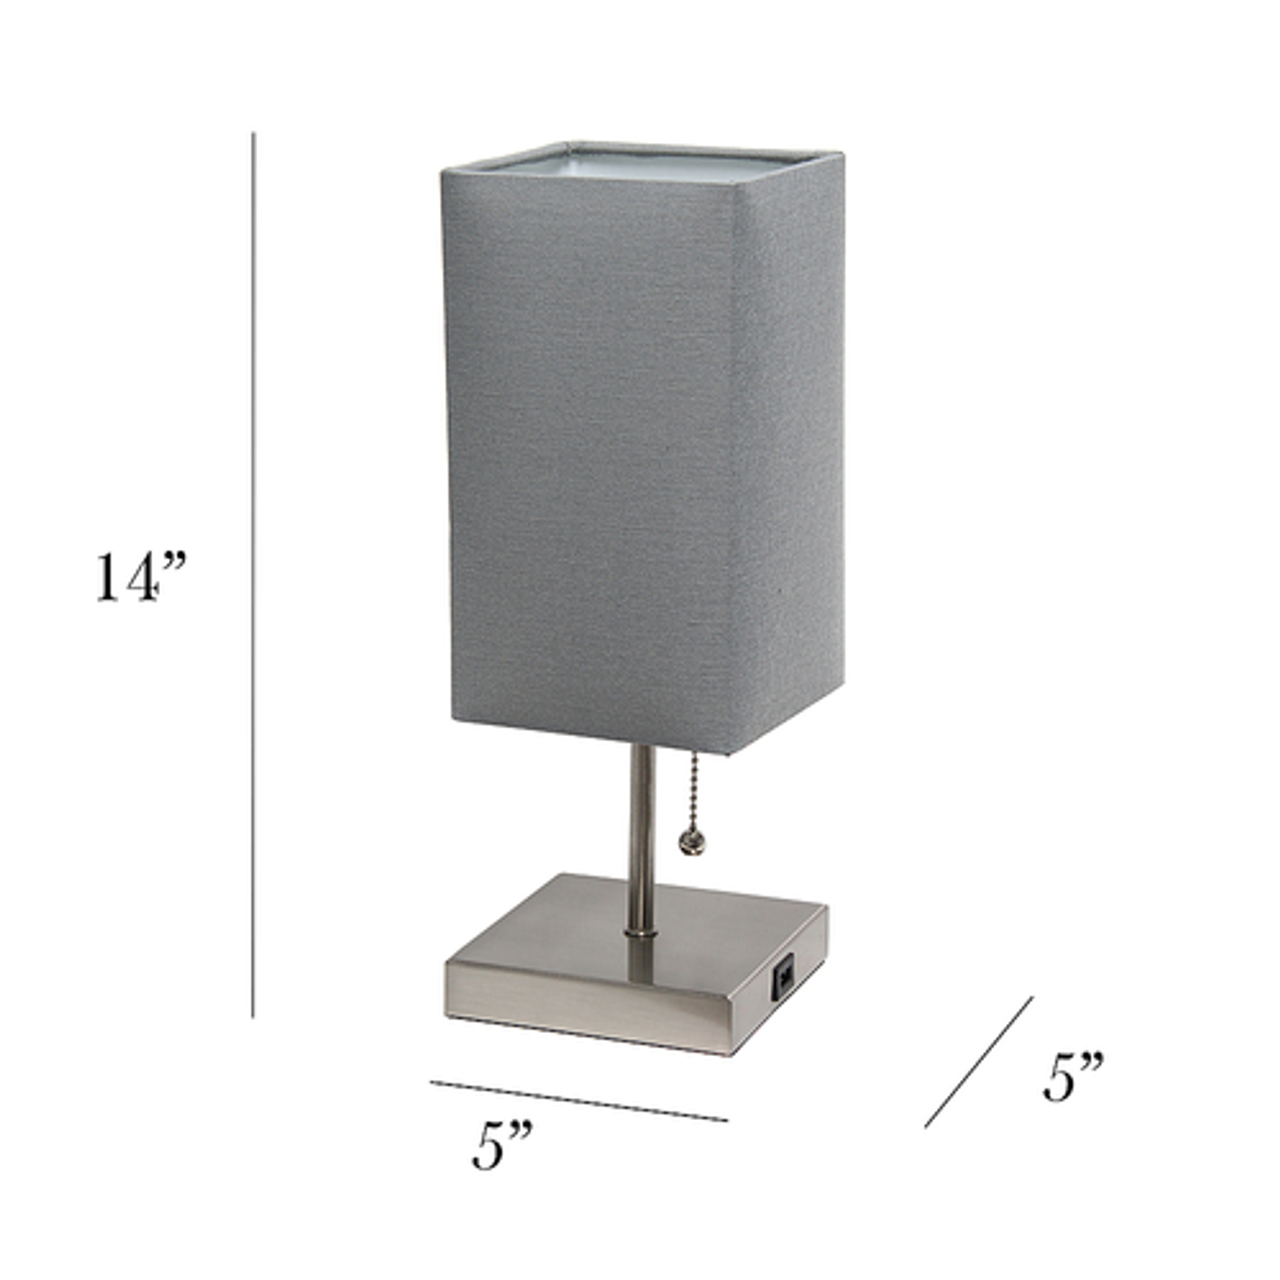 Simple Designs Petite Stick Lamp with USB Charging Port and Fabric Shade, Gray - Brushed Nickel base/Gray shade